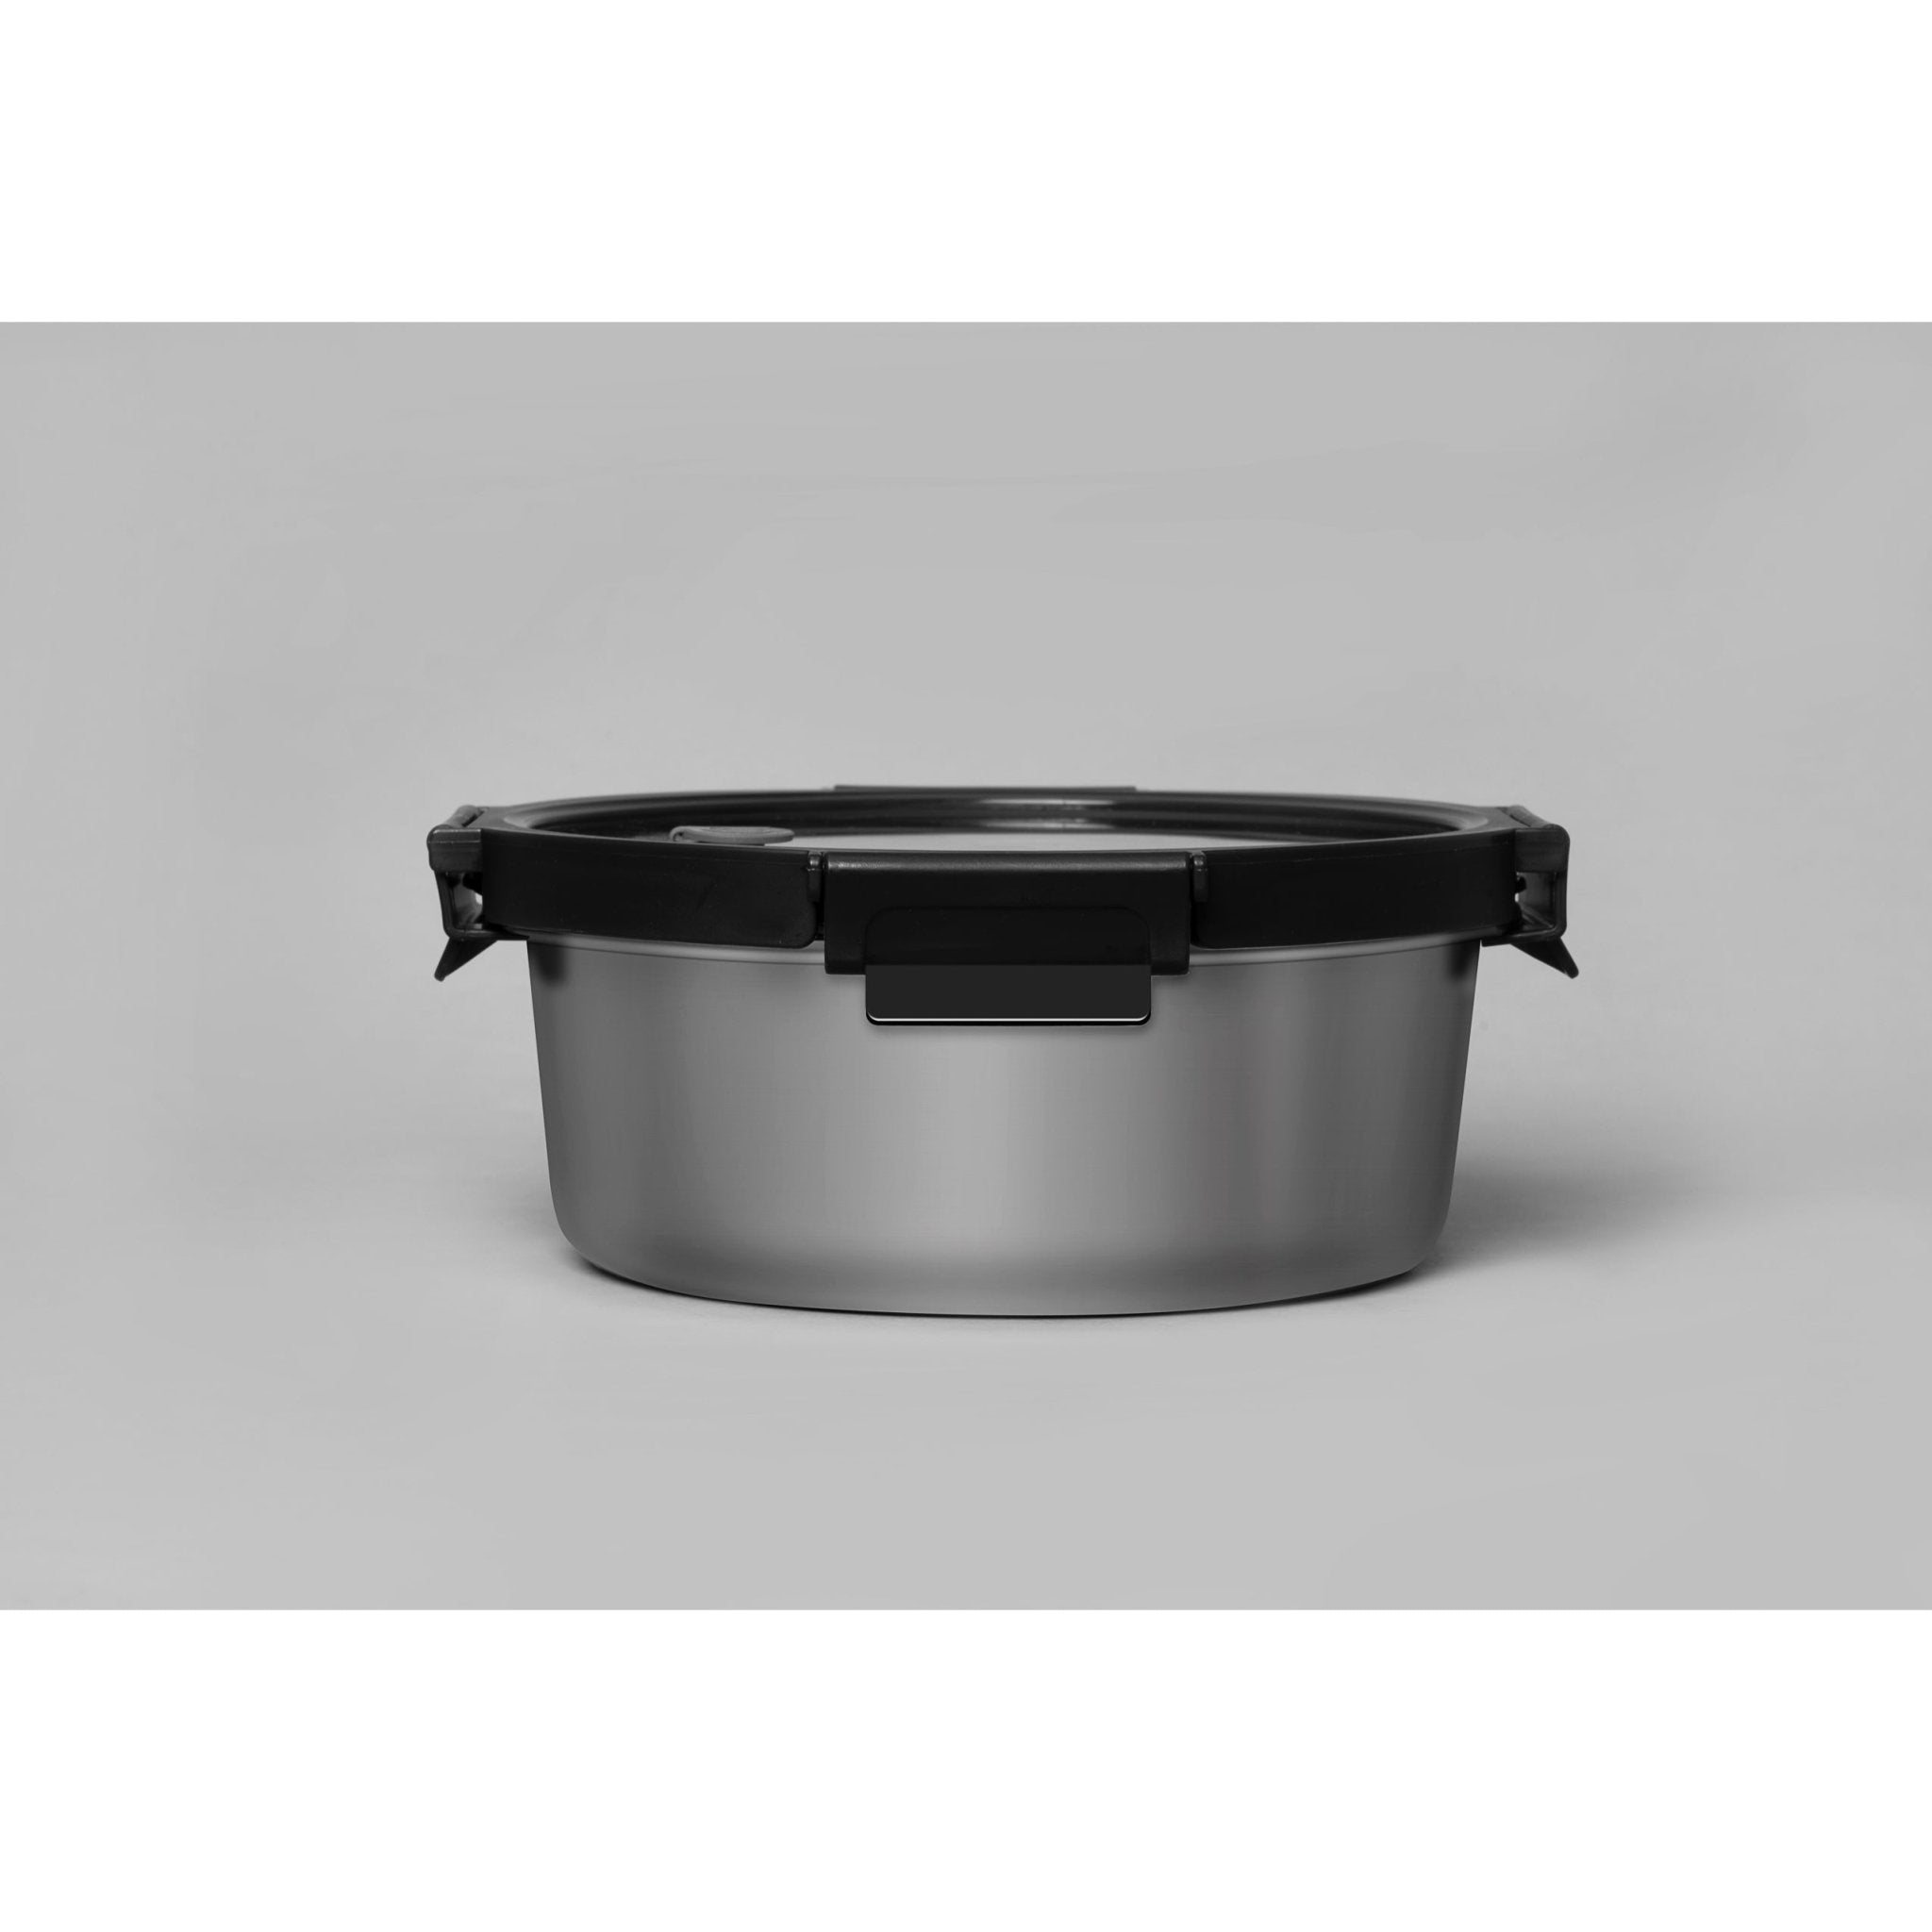 RYEDE™ Microwave-Safe Stainless Steel Container (Round, Square, Rectangle) (800, 1200, or 1800 ML) - GenicookGenicook